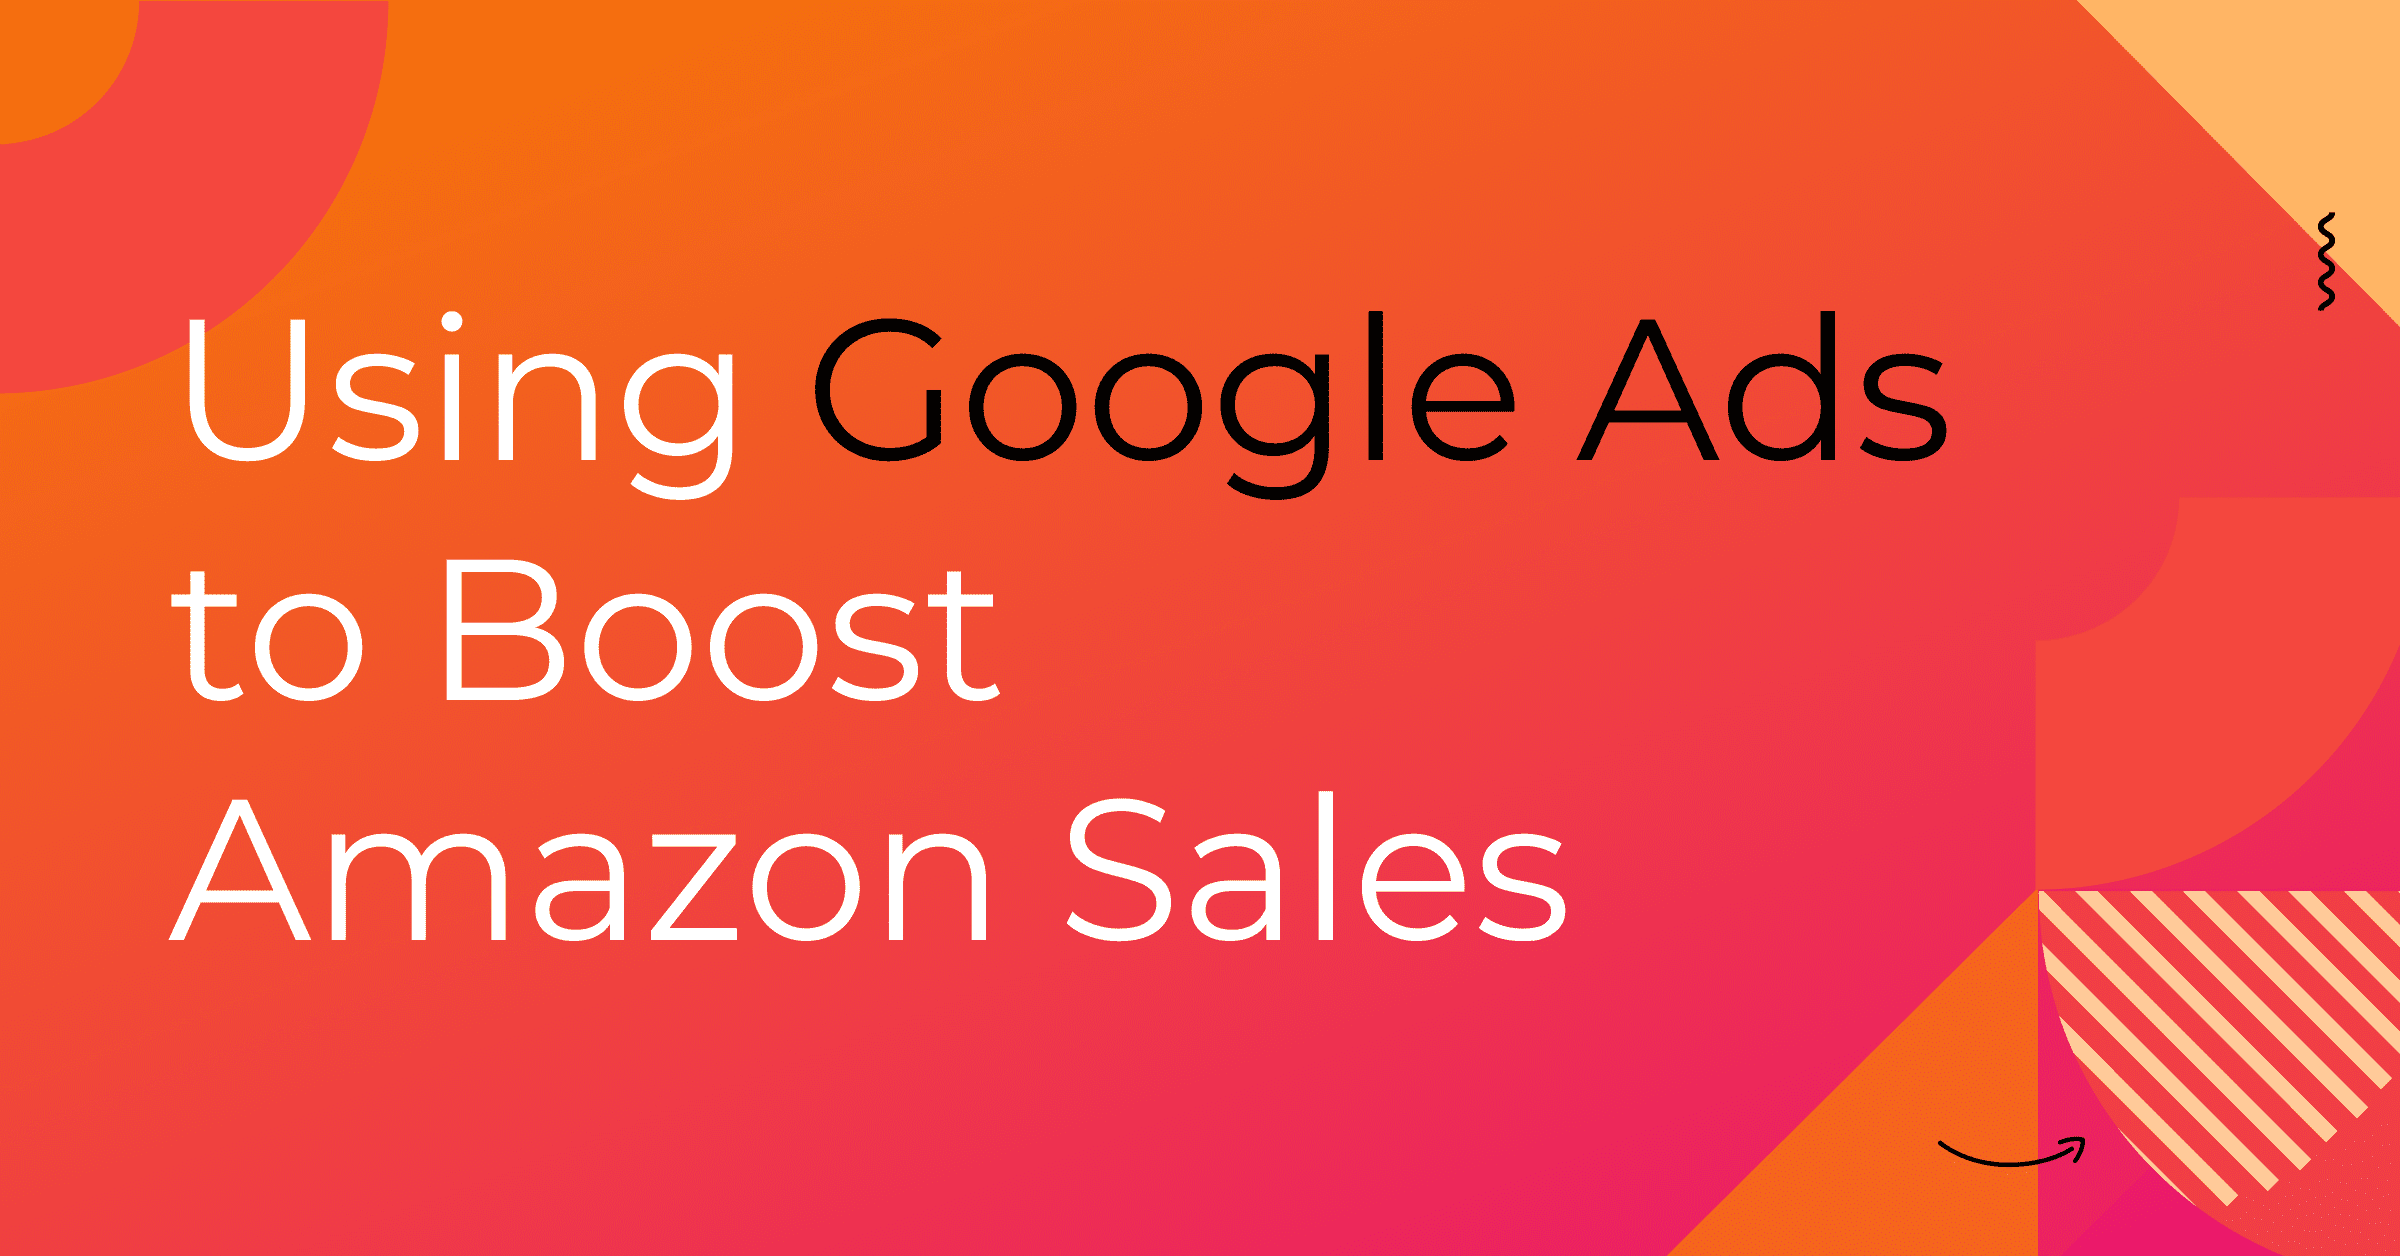 Using Google Ads to Boost Amazon Sales